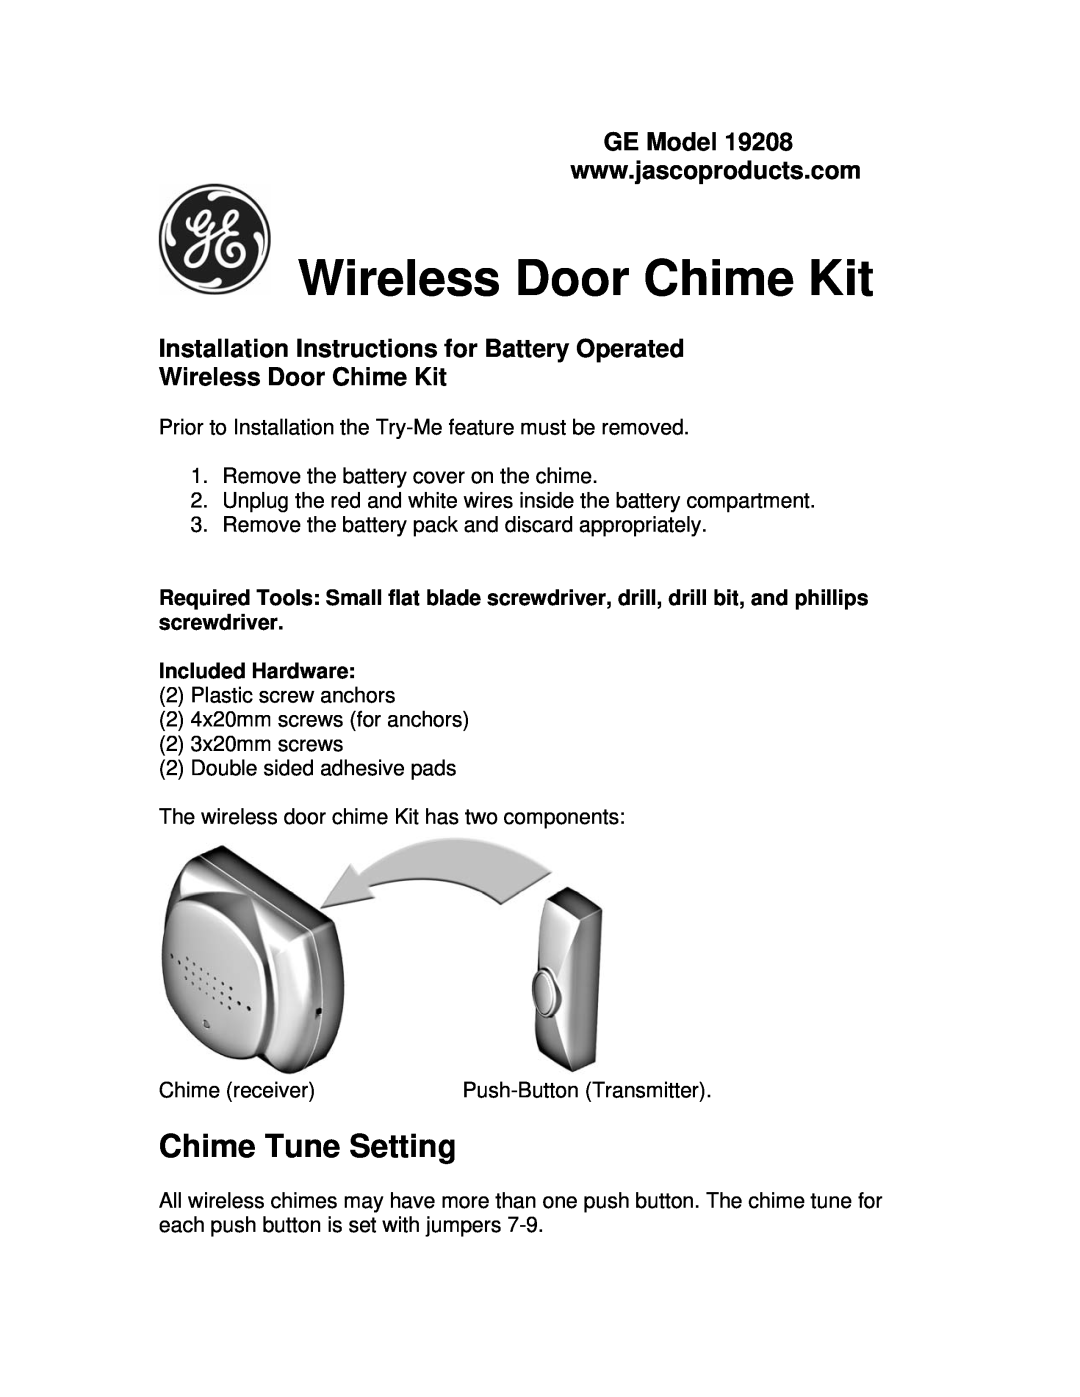 Jasco 19208 installation instructions Chime Tune Setting, Included Hardware, Wireless Door Chime Kit 